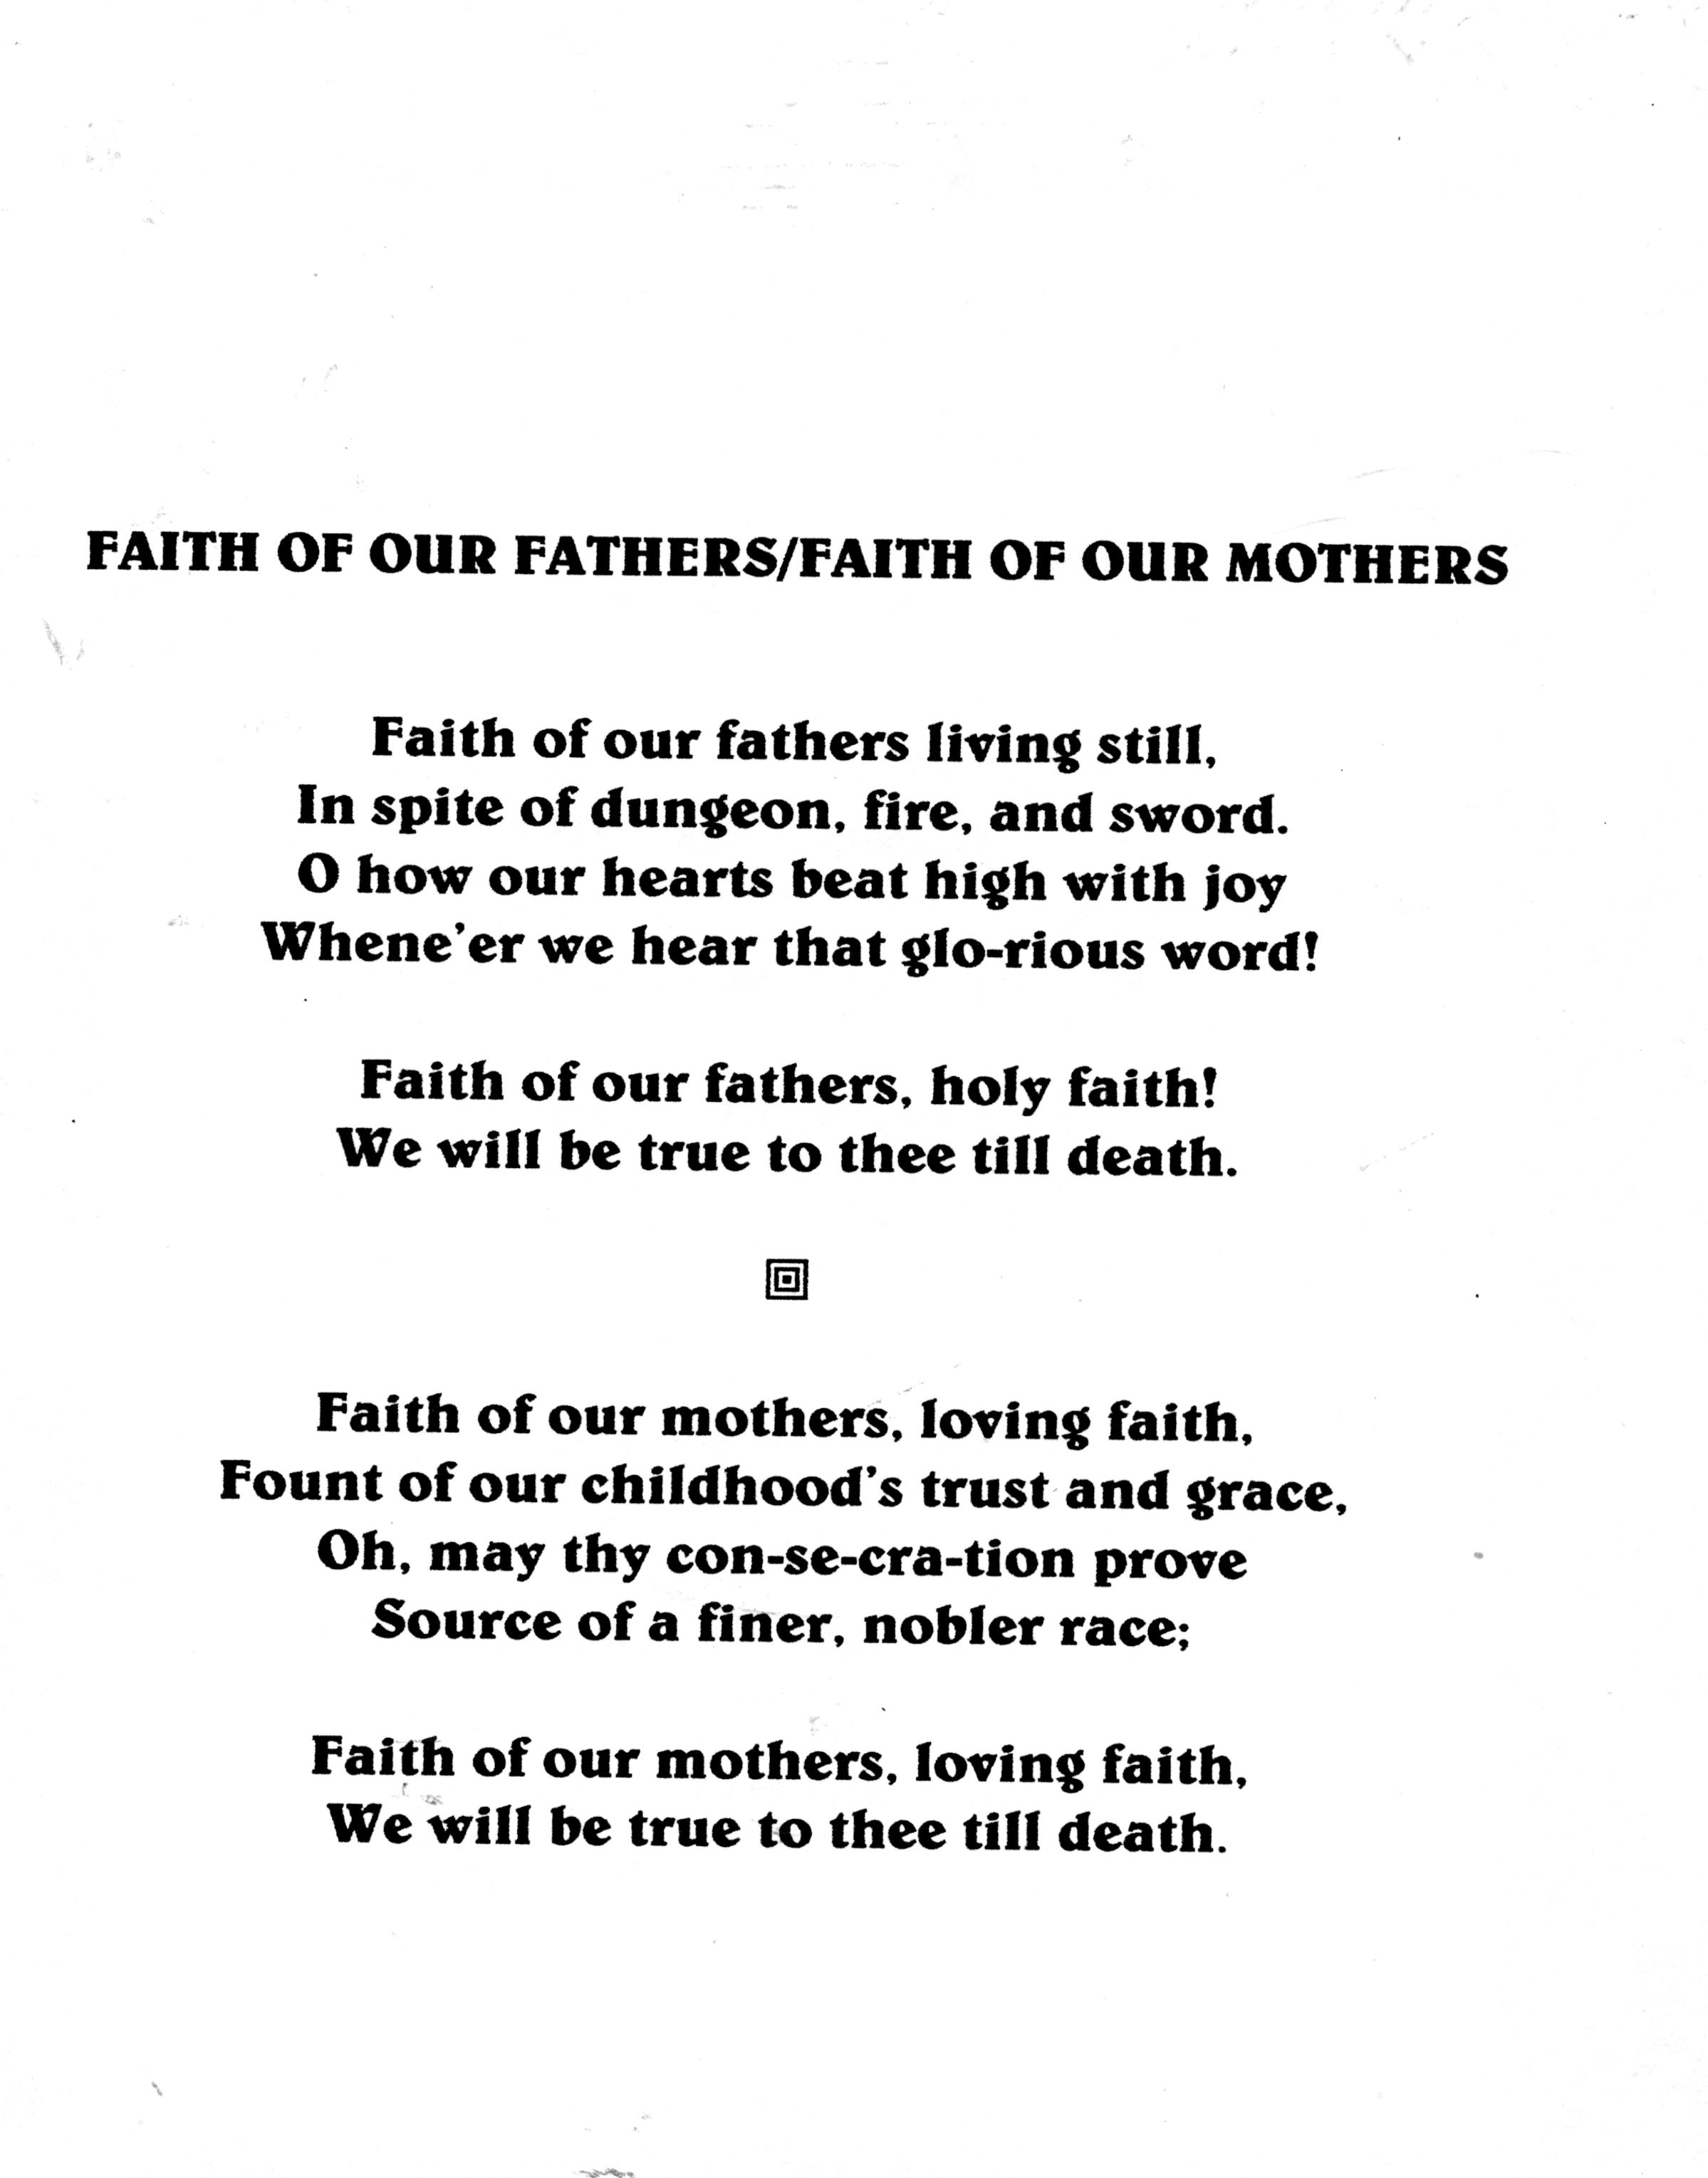 Flyer--- Faith of Our Fathers/ Faith of Our Mothers